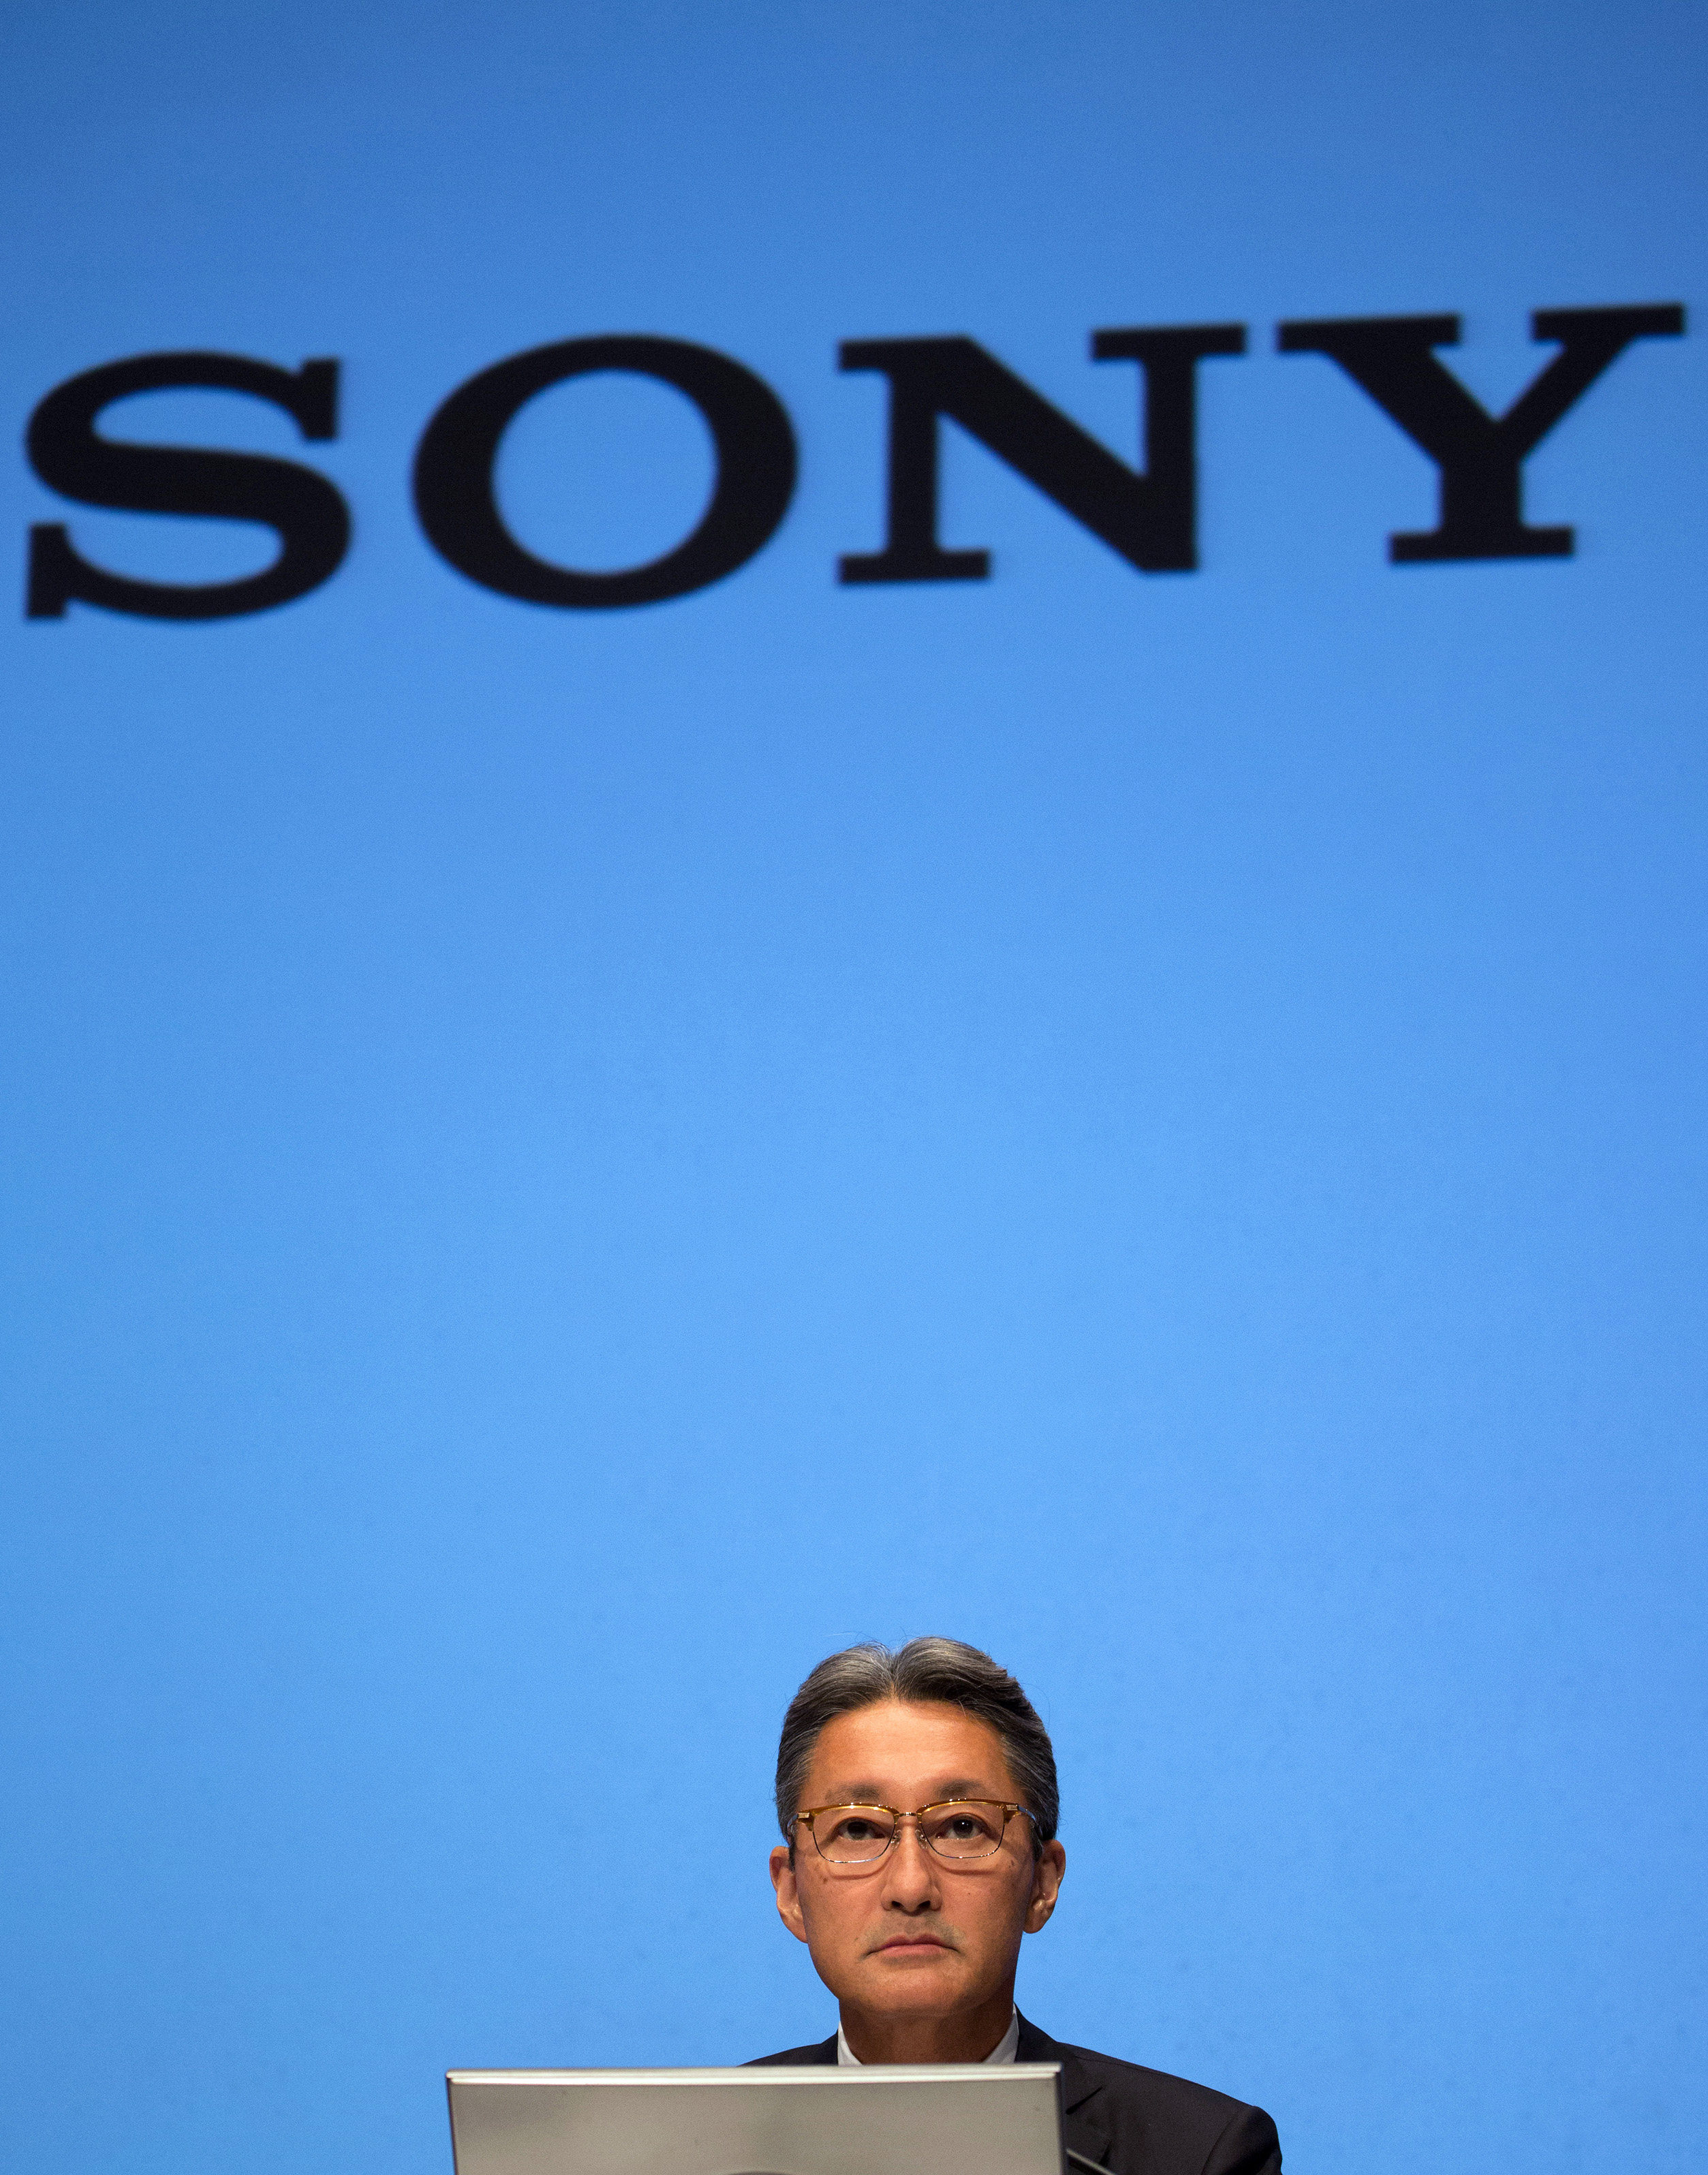 Kazuo Hirai, president and CEO of Sony Corp., attends a news conference in Tokyo, Japan, on Wednesday, Sept. 17, 2014. (Bloomberg via Getty Images)